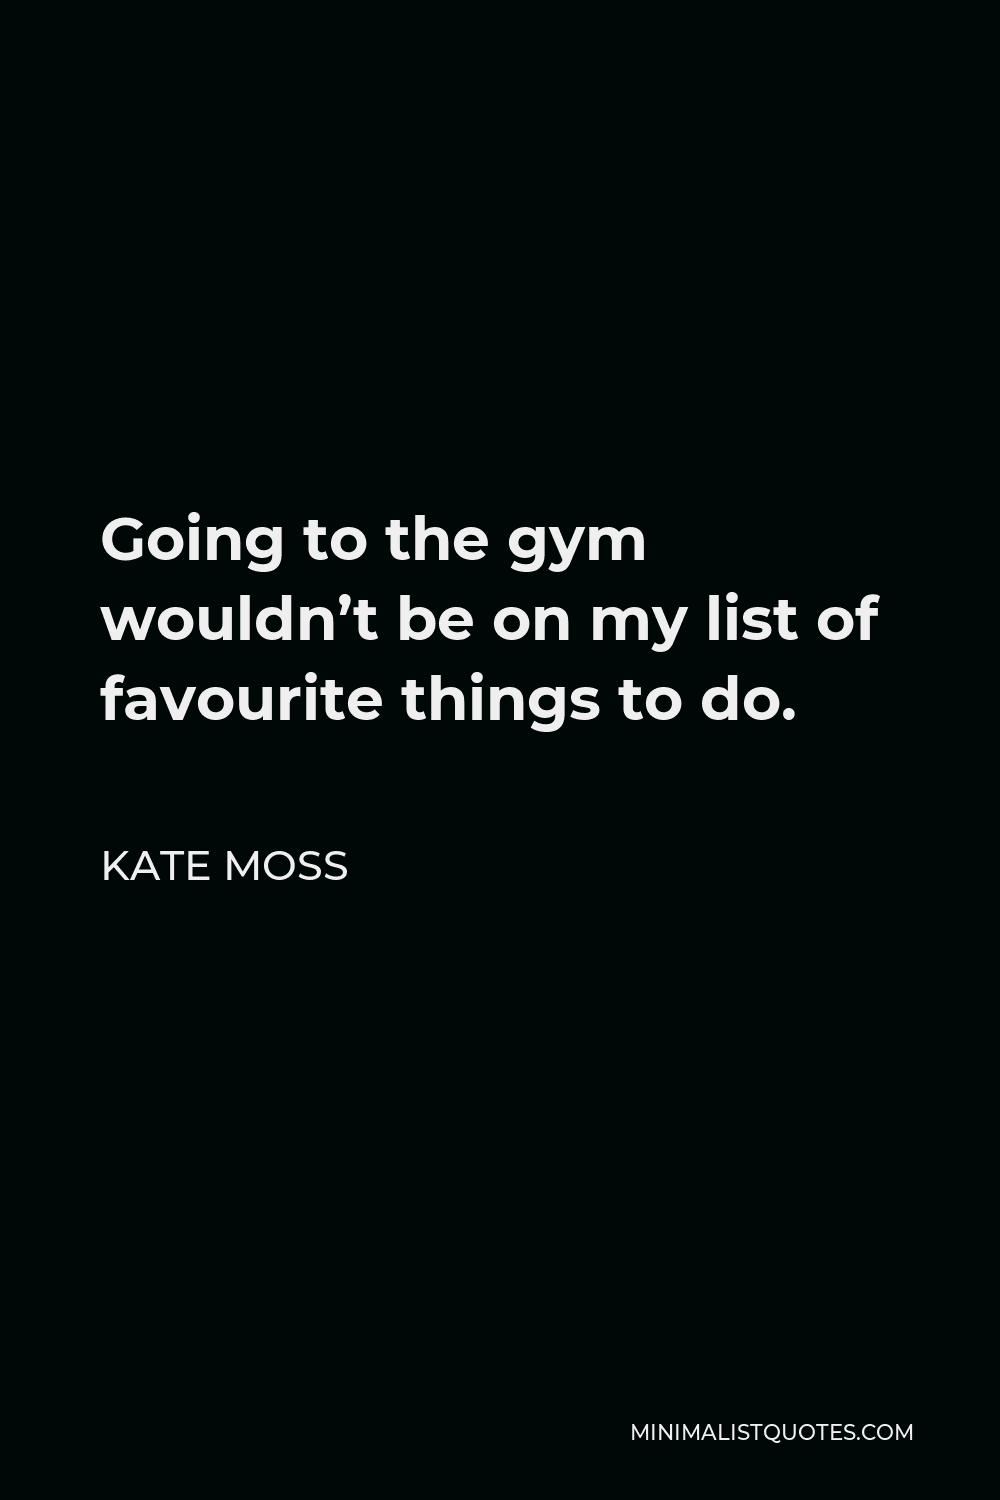 Kate Moss Quote - Going to the gym wouldn’t be on my list of favourite things to do.